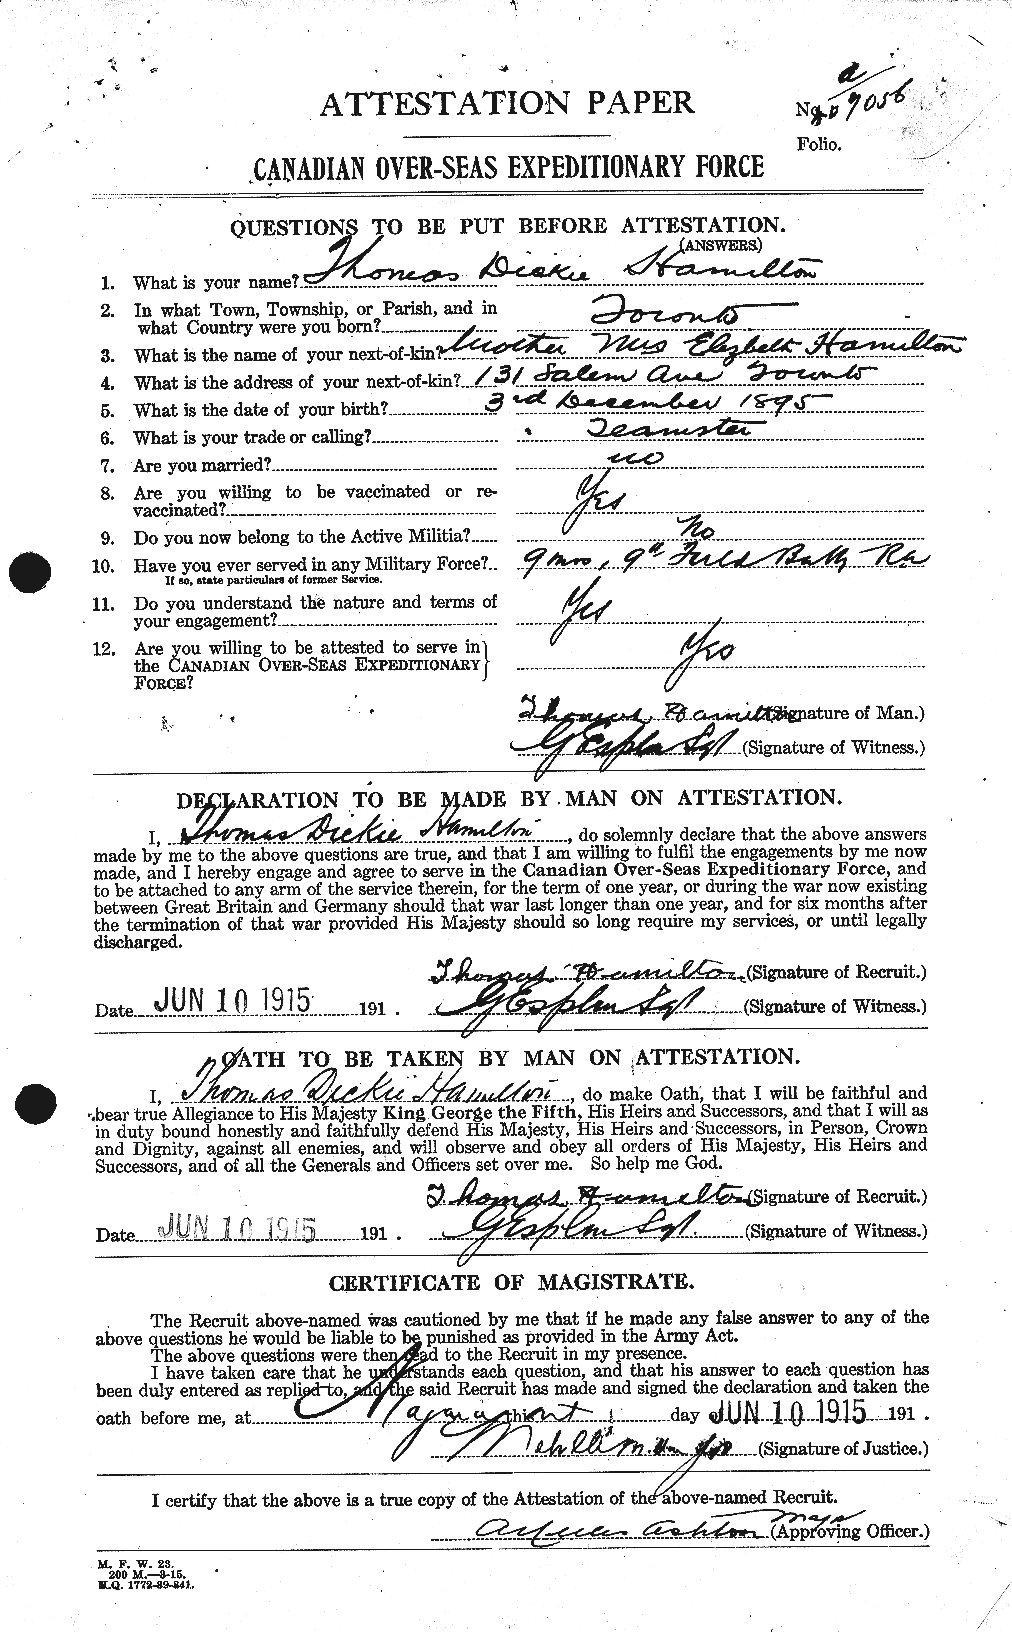 Personnel Records of the First World War - CEF 374793a